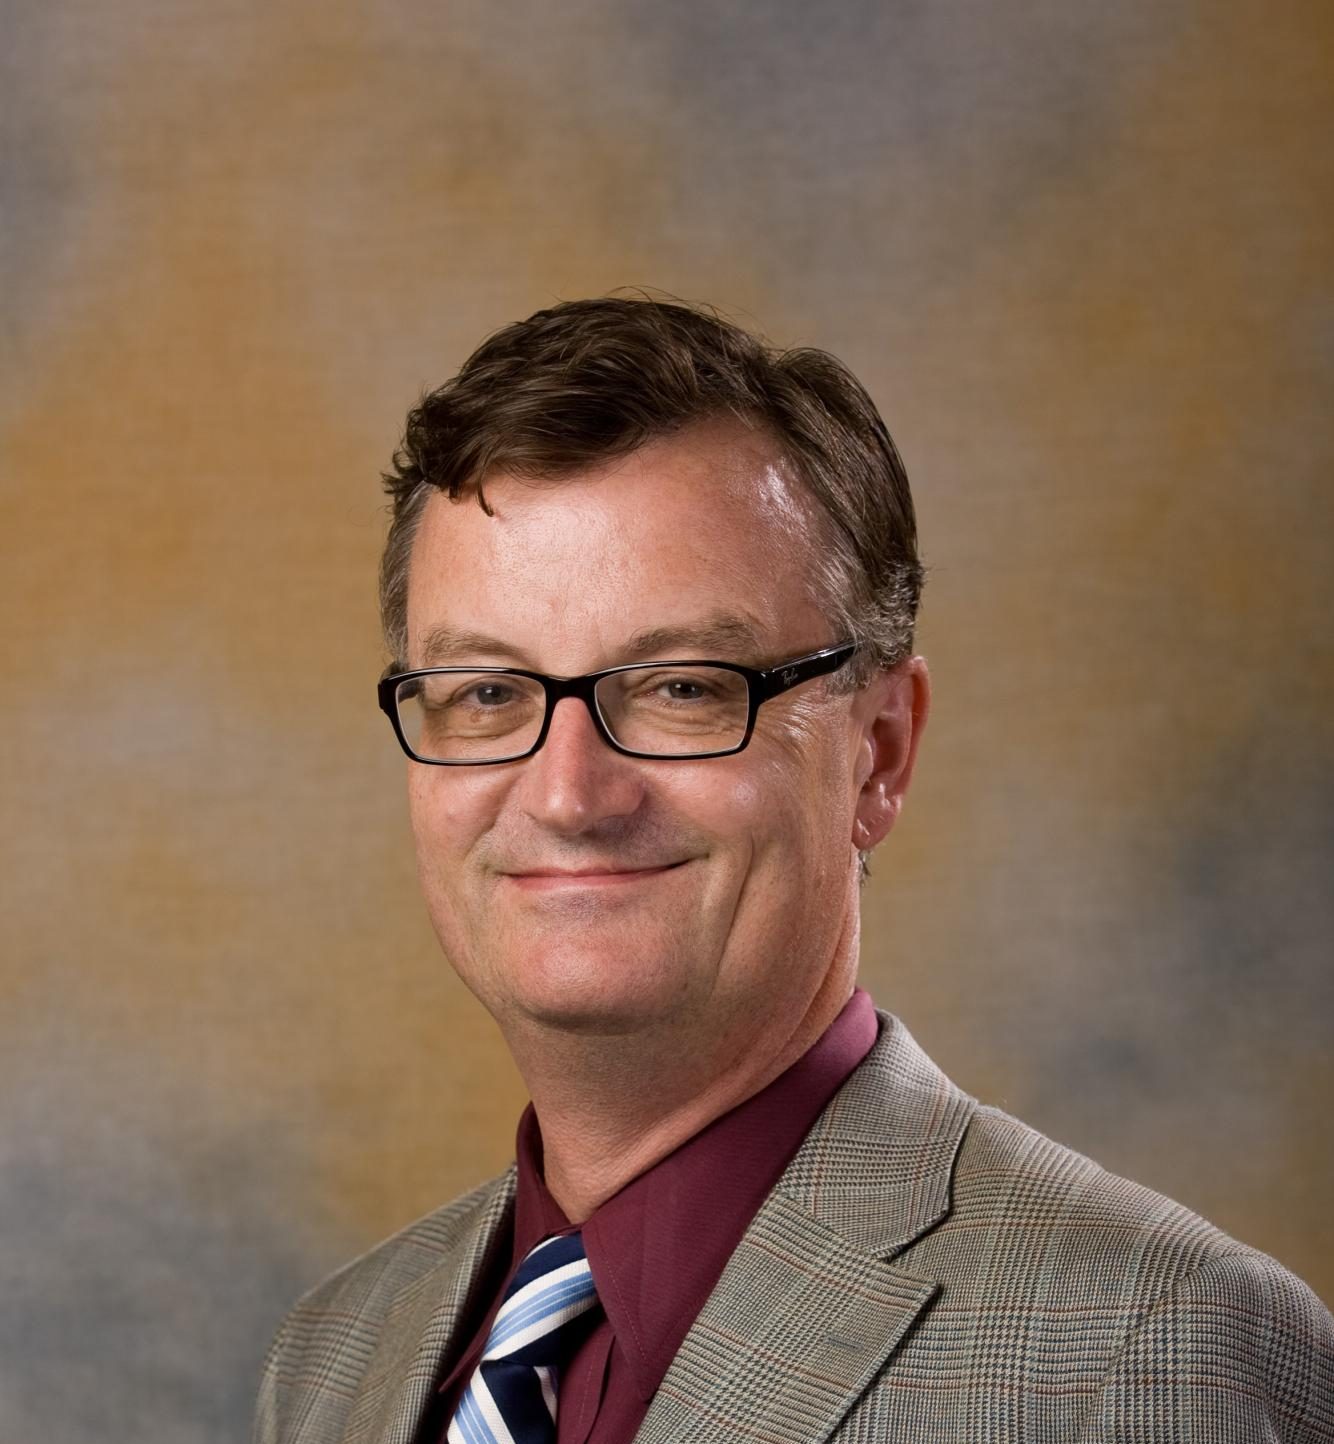 Gordon Baylis is a professor of psychological sciences at WKU and makes $184,383.36 a year, which is $94.56 an hour. 